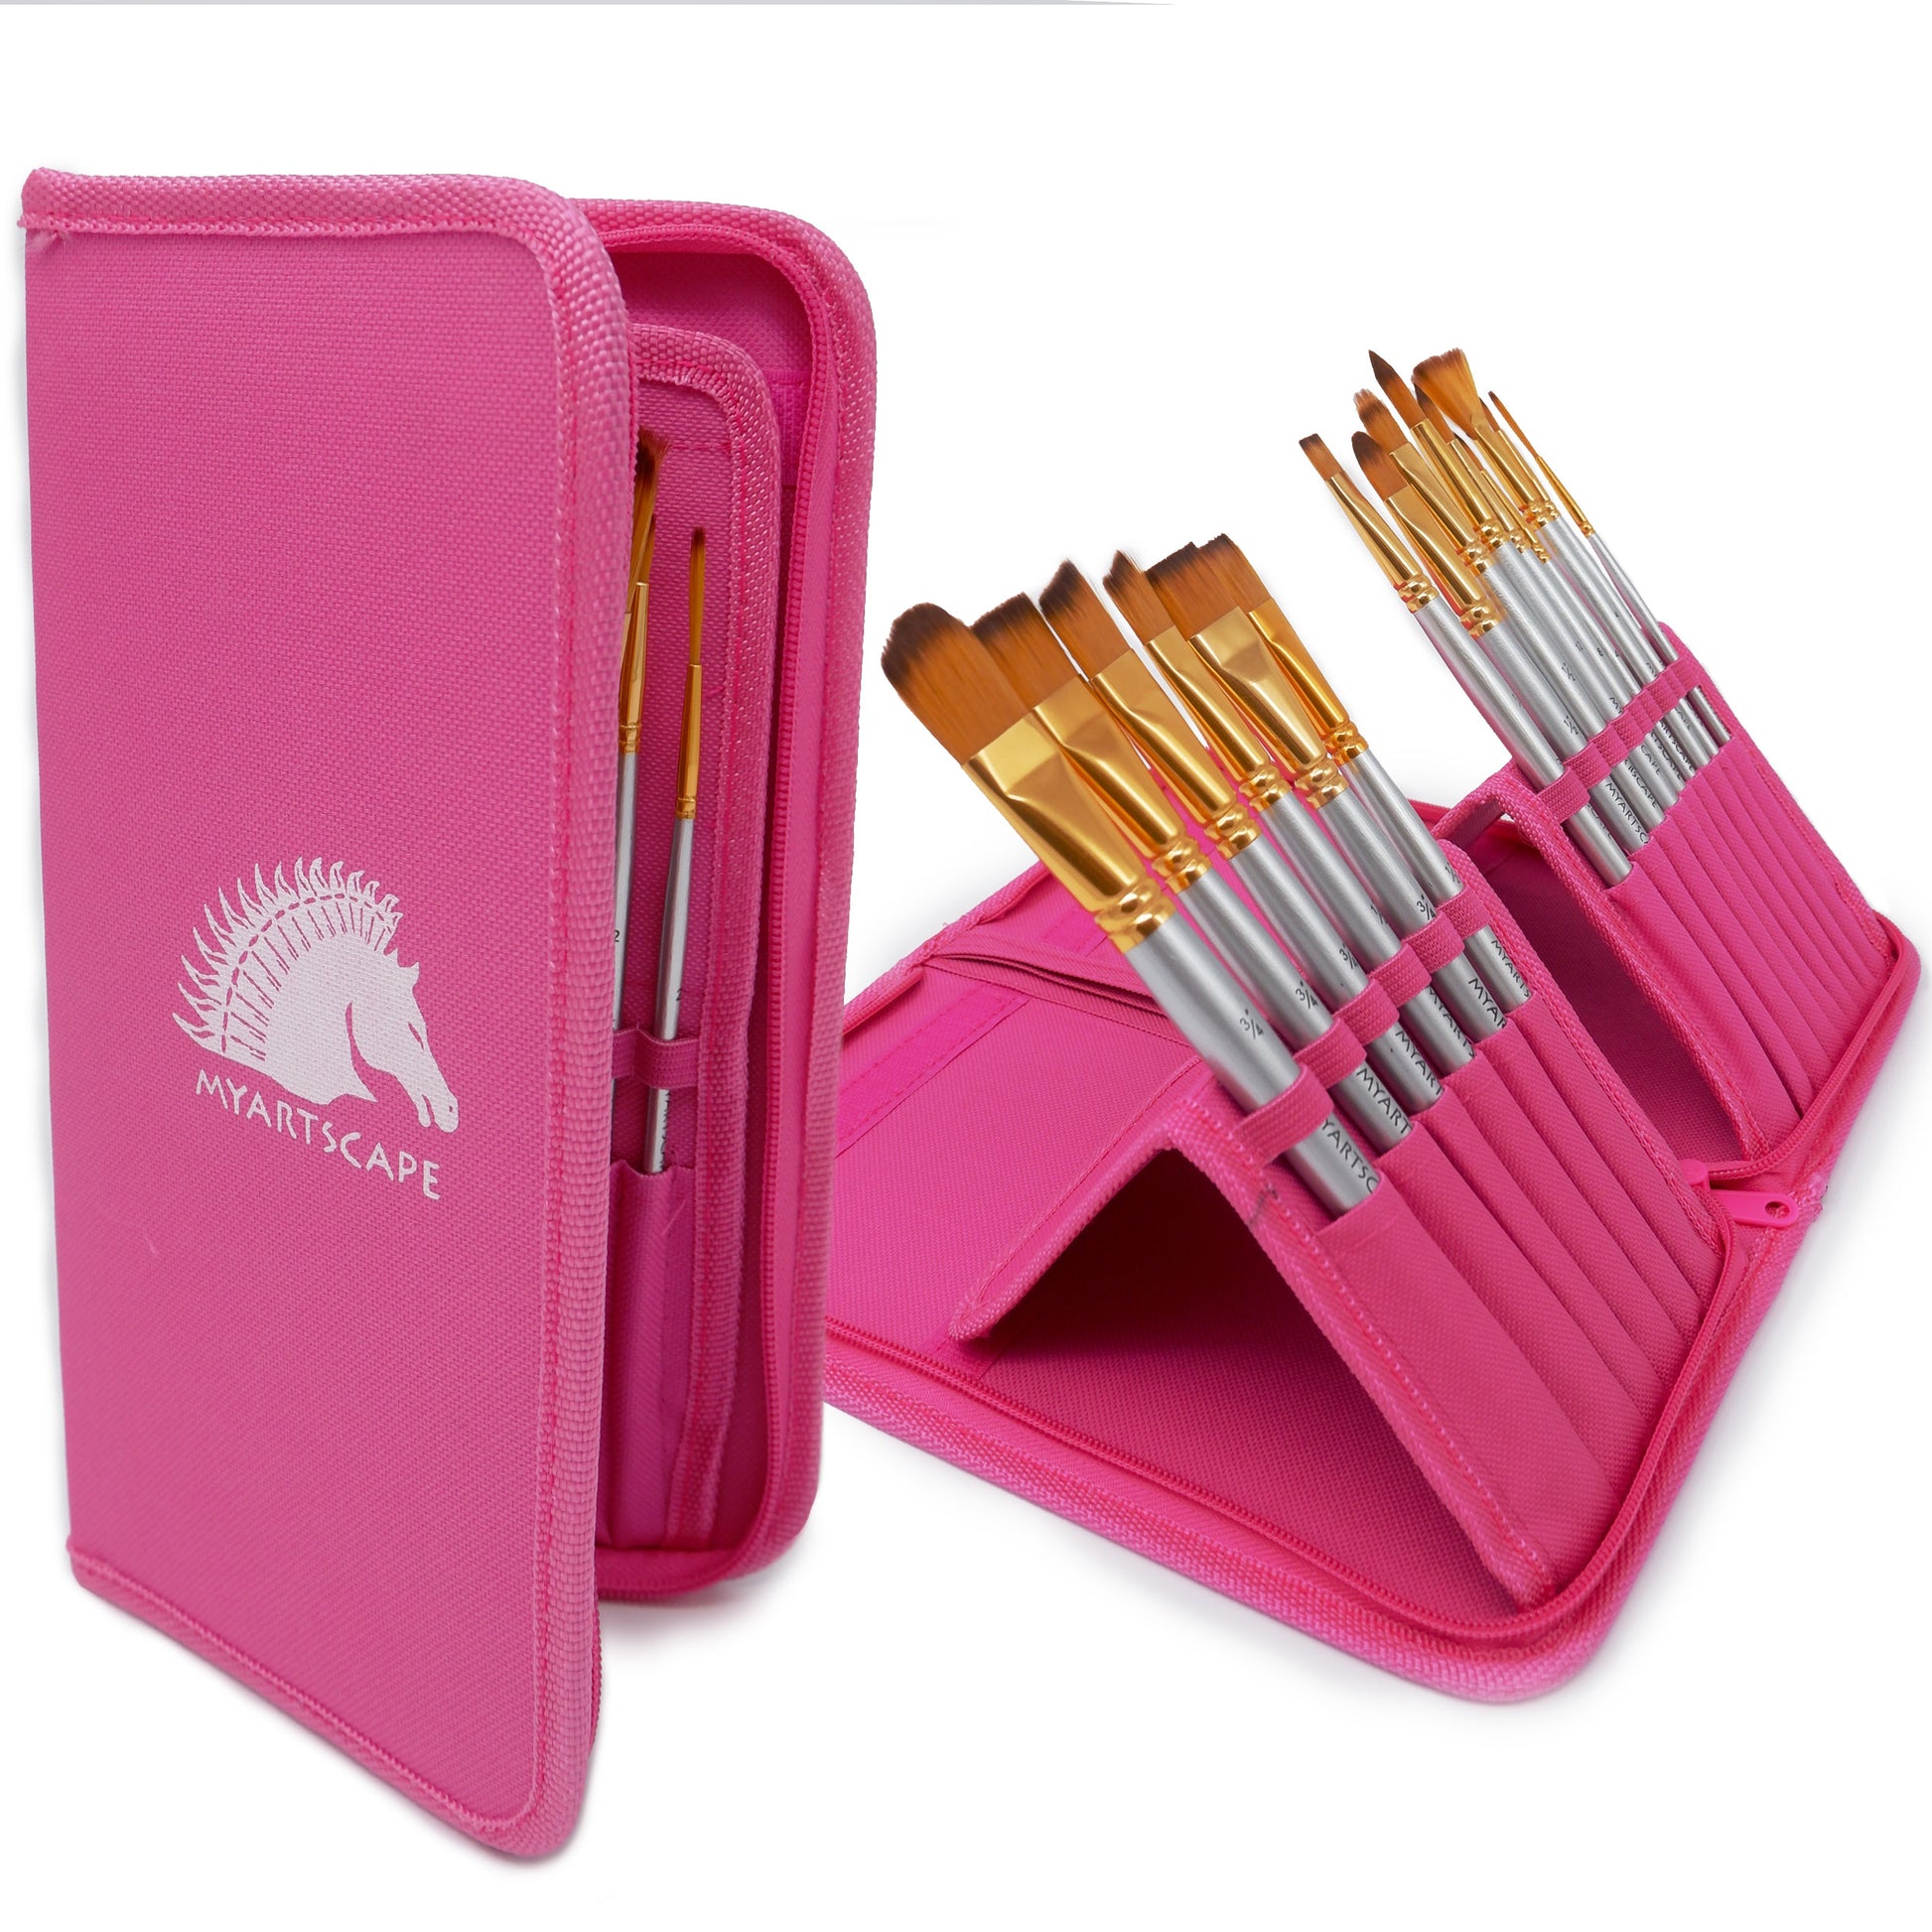 15 Short Handle Artist Paintbrushes in the Compact Travel-Friendly Set